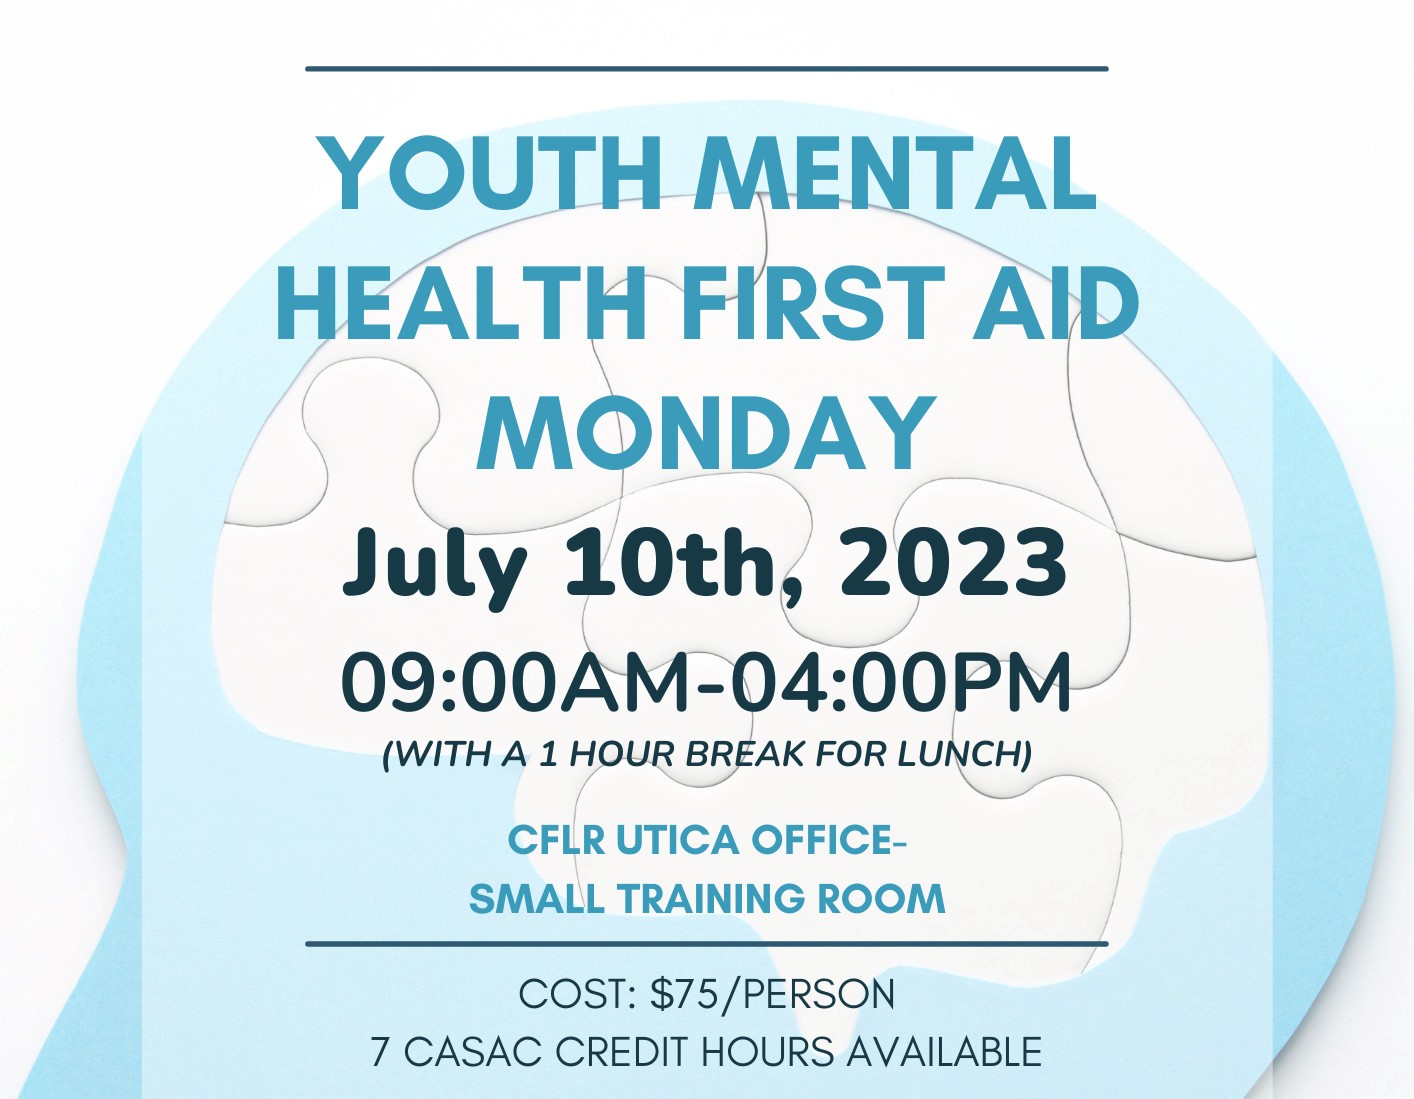 CFLR Offers Class on Youth Mental Health on Monday, July 10th